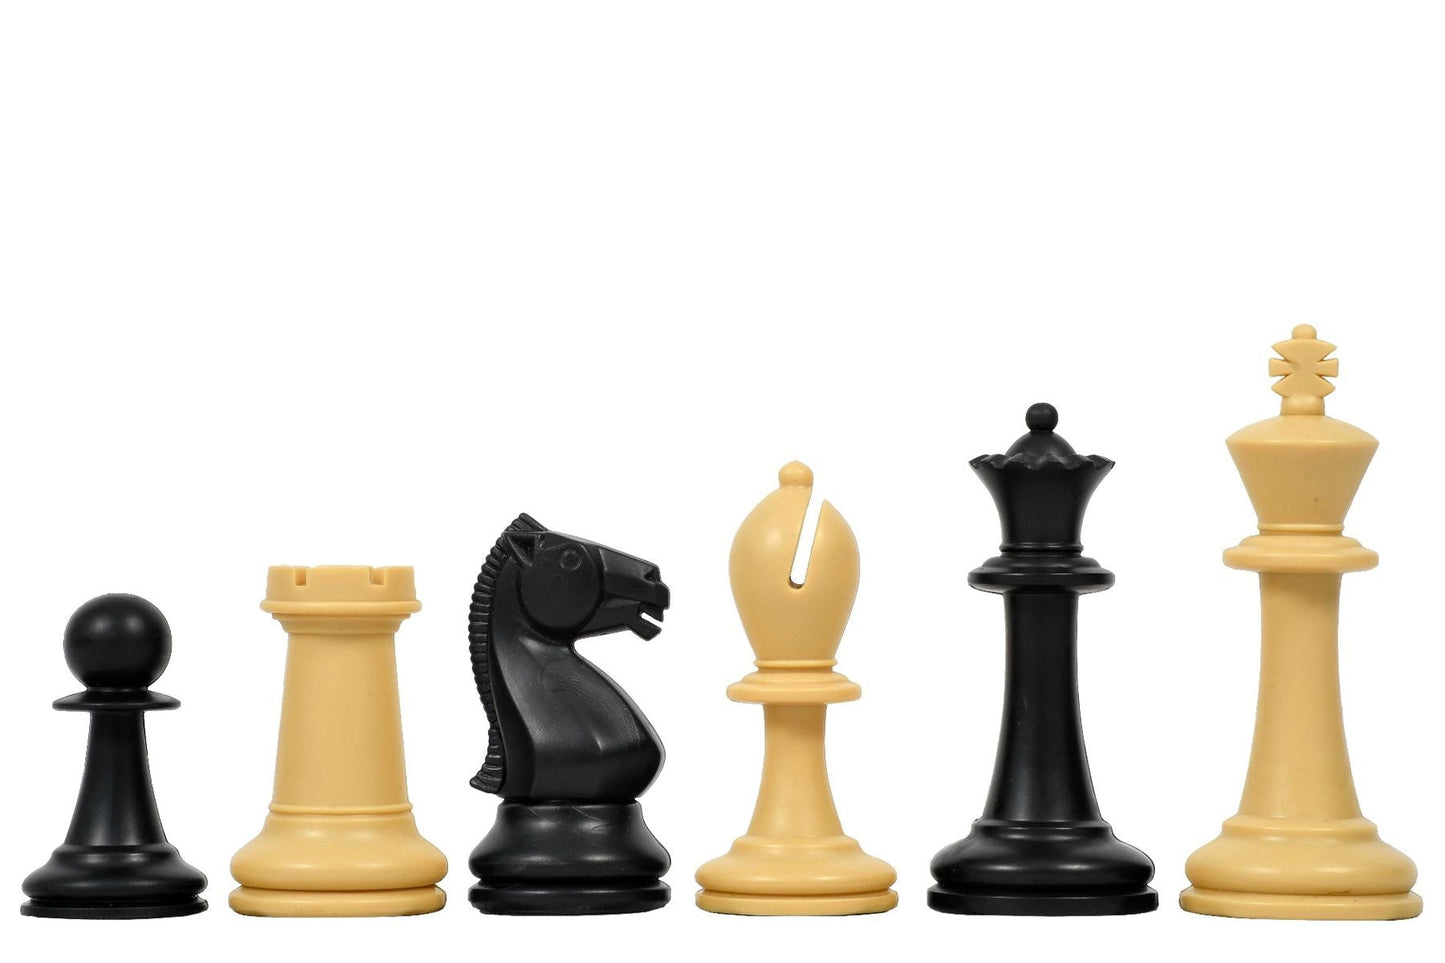 The Player Series Tournament Plastic Chess Pieces - 3.8" King